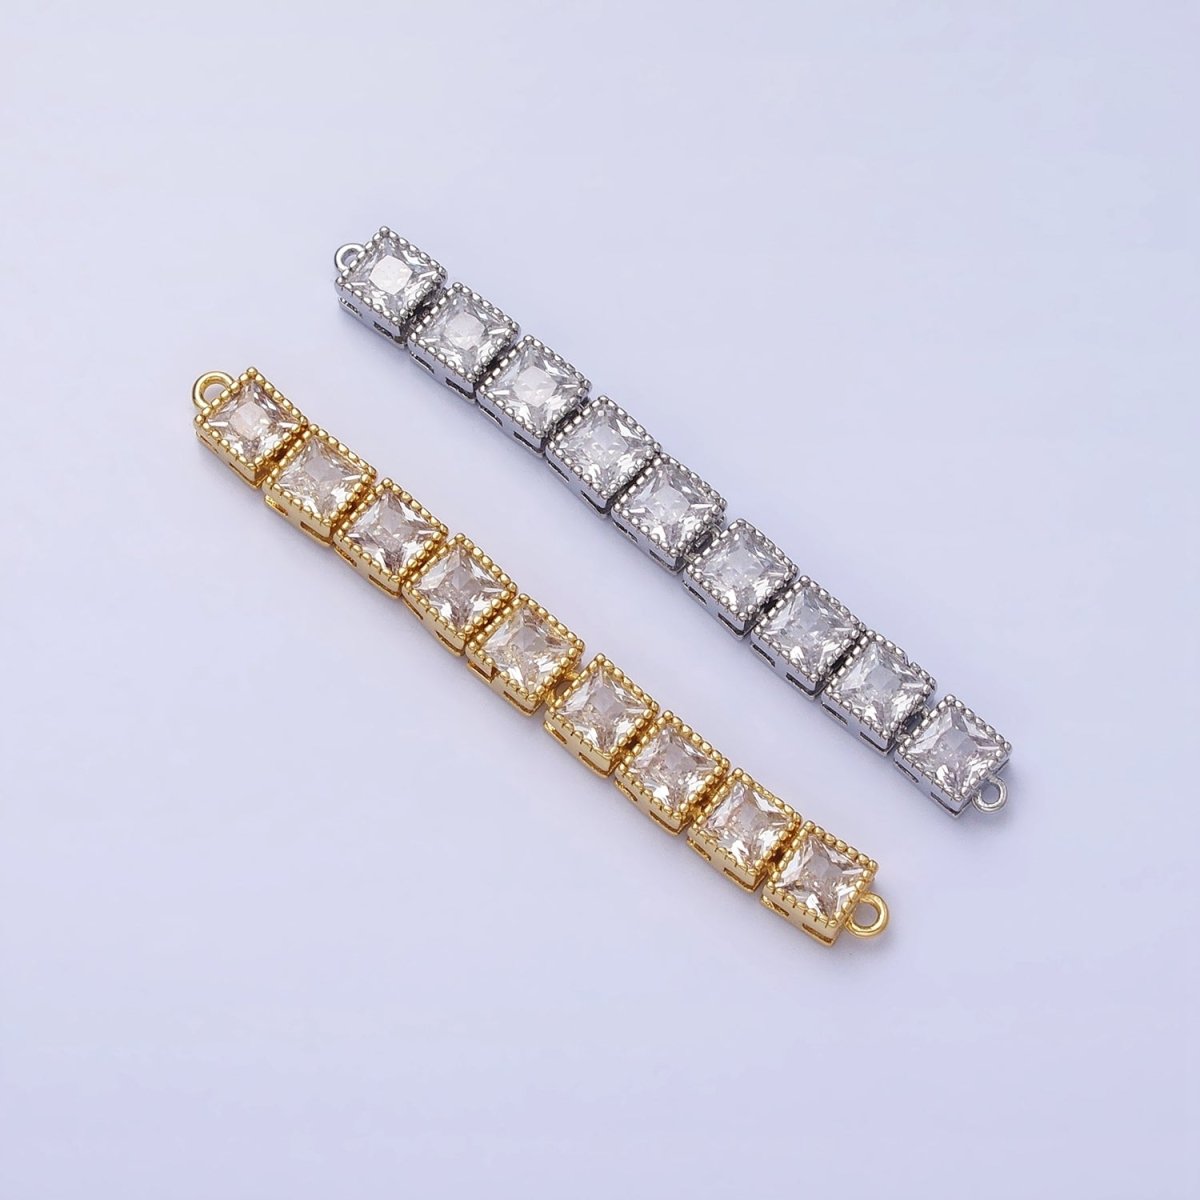 Bendable Gold Square Long Bar Connector, CZ Micro Pave Silver Geometric Link Connector Necklace Jewelry Making AA850 AA851 - DLUXCA